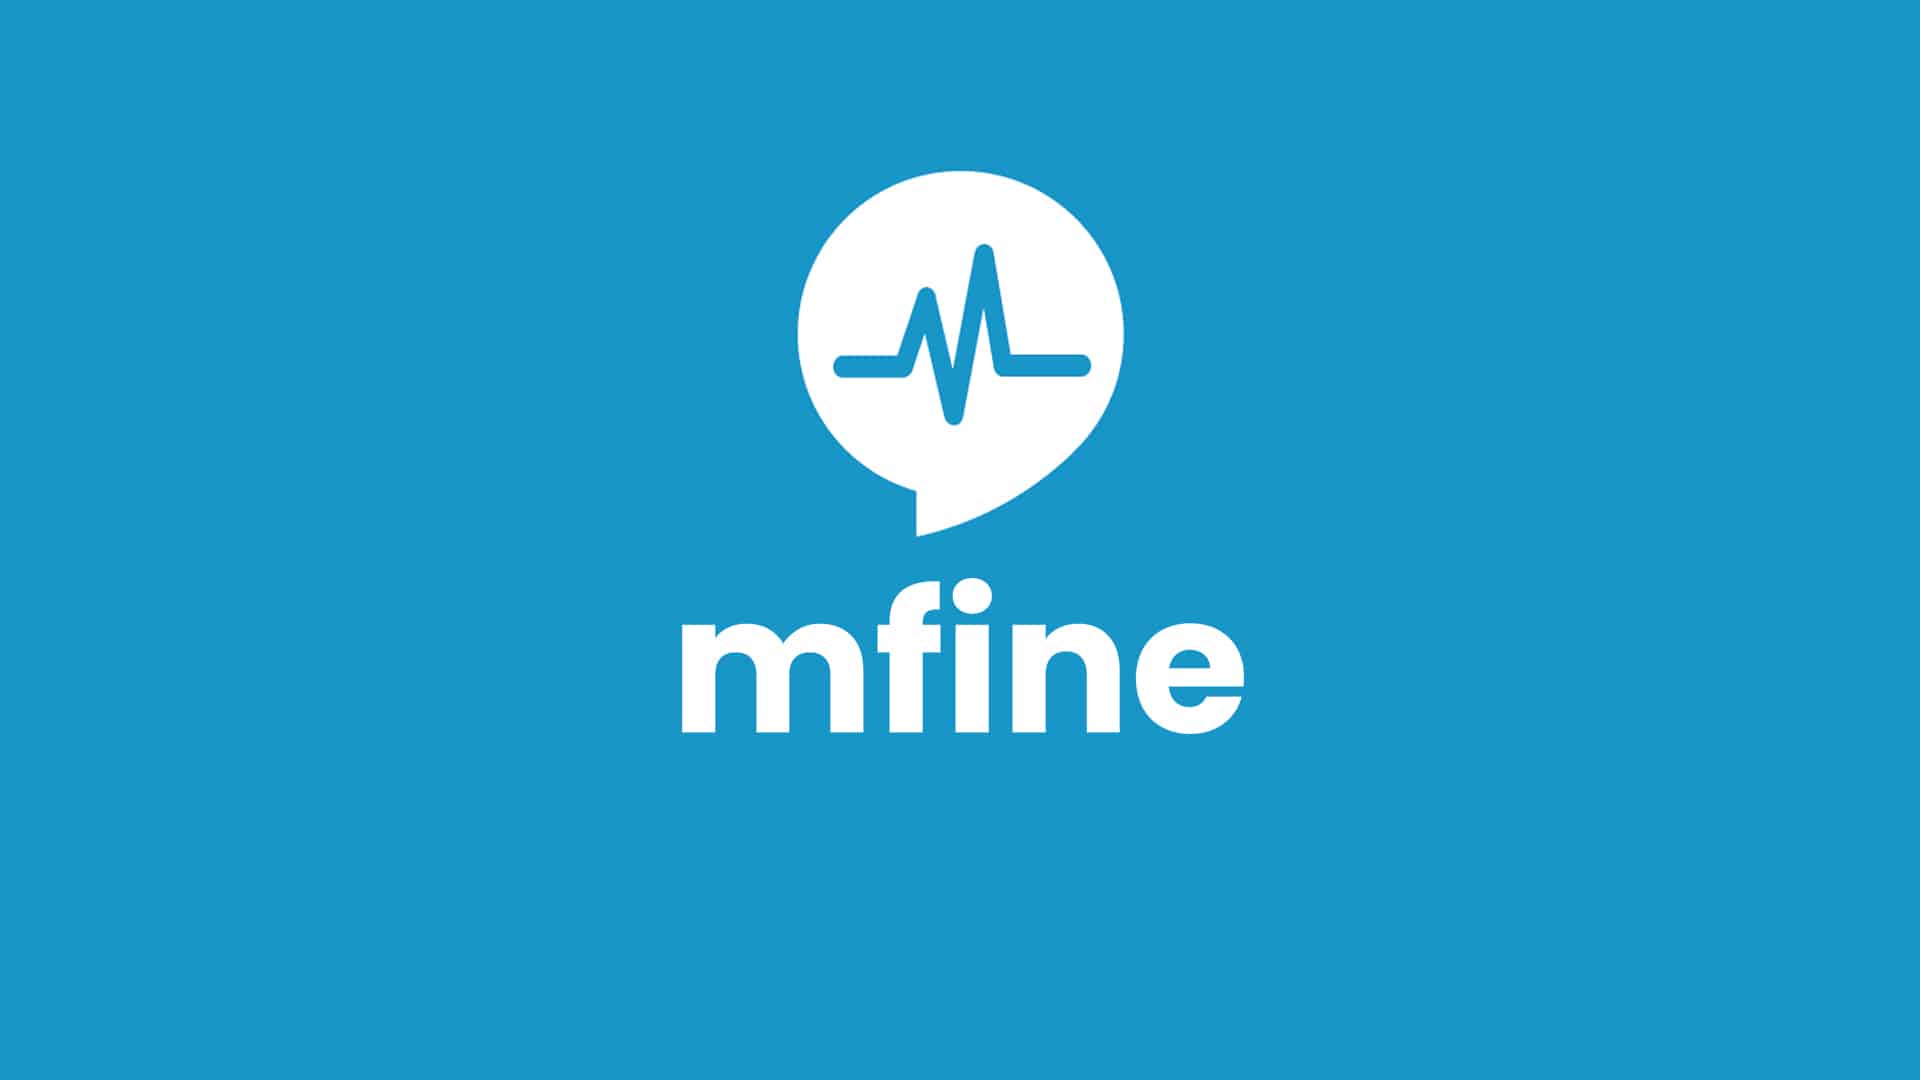 MFine Raises $16m From New & Existing Investors Led by Heritas Capital as Adoption of Digital Health Soars in India Amidst COVID-19 Pandemic